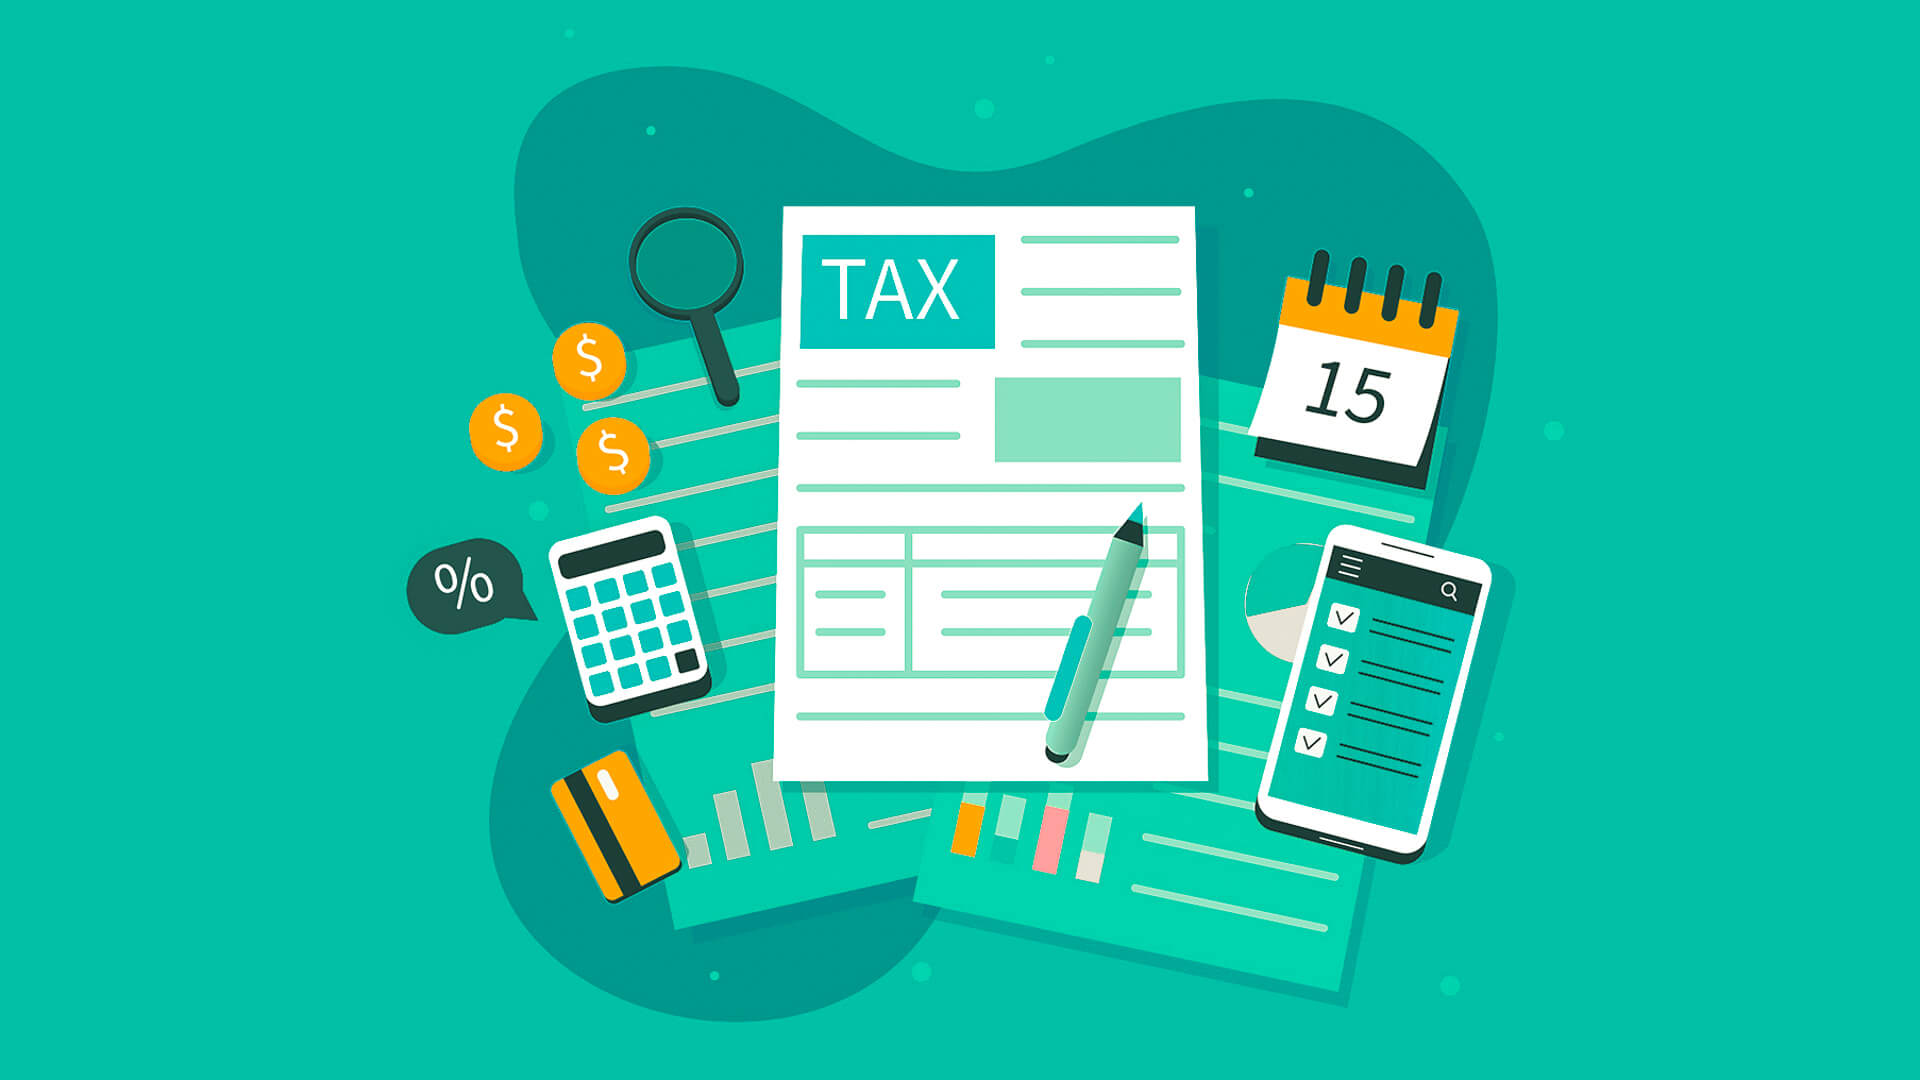 <p>The first step in making your taxes easier is to know the due date. Tax Day was pushed back the last several years because of holidays and the COVID-19 pandemic. In 2024, there will be no such delays, and the filing deadline is back to the traditional date of April 15.</p> <p><strong>Find Out: <a href="https://www.gobankingrates.com/taxes/tax-laws/type-of-debt-that-terrifies-dave-ramsey/?utm_term=related_link_3&utm_campaign=1263068&utm_source=msn.com&utm_content=5&utm_medium=rss" rel="">This Is the One Type of Debt That 'Terrifies' Dave Ramsey</a><br>Learn More: <a href="https://www.gobankingrates.com/taxes/tax-laws/irs-increases-gift-and-estate-tax-exempt-limits-how-much-you-can-give-without-paying/?utm_term=related_link_4&utm_campaign=1263068&utm_source=msn.com&utm_content=6&utm_medium=rss" rel="">IRS Increases Gift and Estate Tax Exempt Limits -- Here's How Much You Can Give Without Paying</a></strong></p> <p><strong>Sponsored: </strong><a href="https://products.gobankingrates.com/pub/9e562dc4-52f4-11ec-a8c2-0e0b1012e14d?targeting%5Bcompany_product%5D=tra&utm_source=msn.com&utm_campaign=rss&passthru=msn.com" rel="noreferrer noopener nofollow">Owe the IRS $10K or more? Schedule a FREE consultation to see if you qualify for tax relief.</a></p>